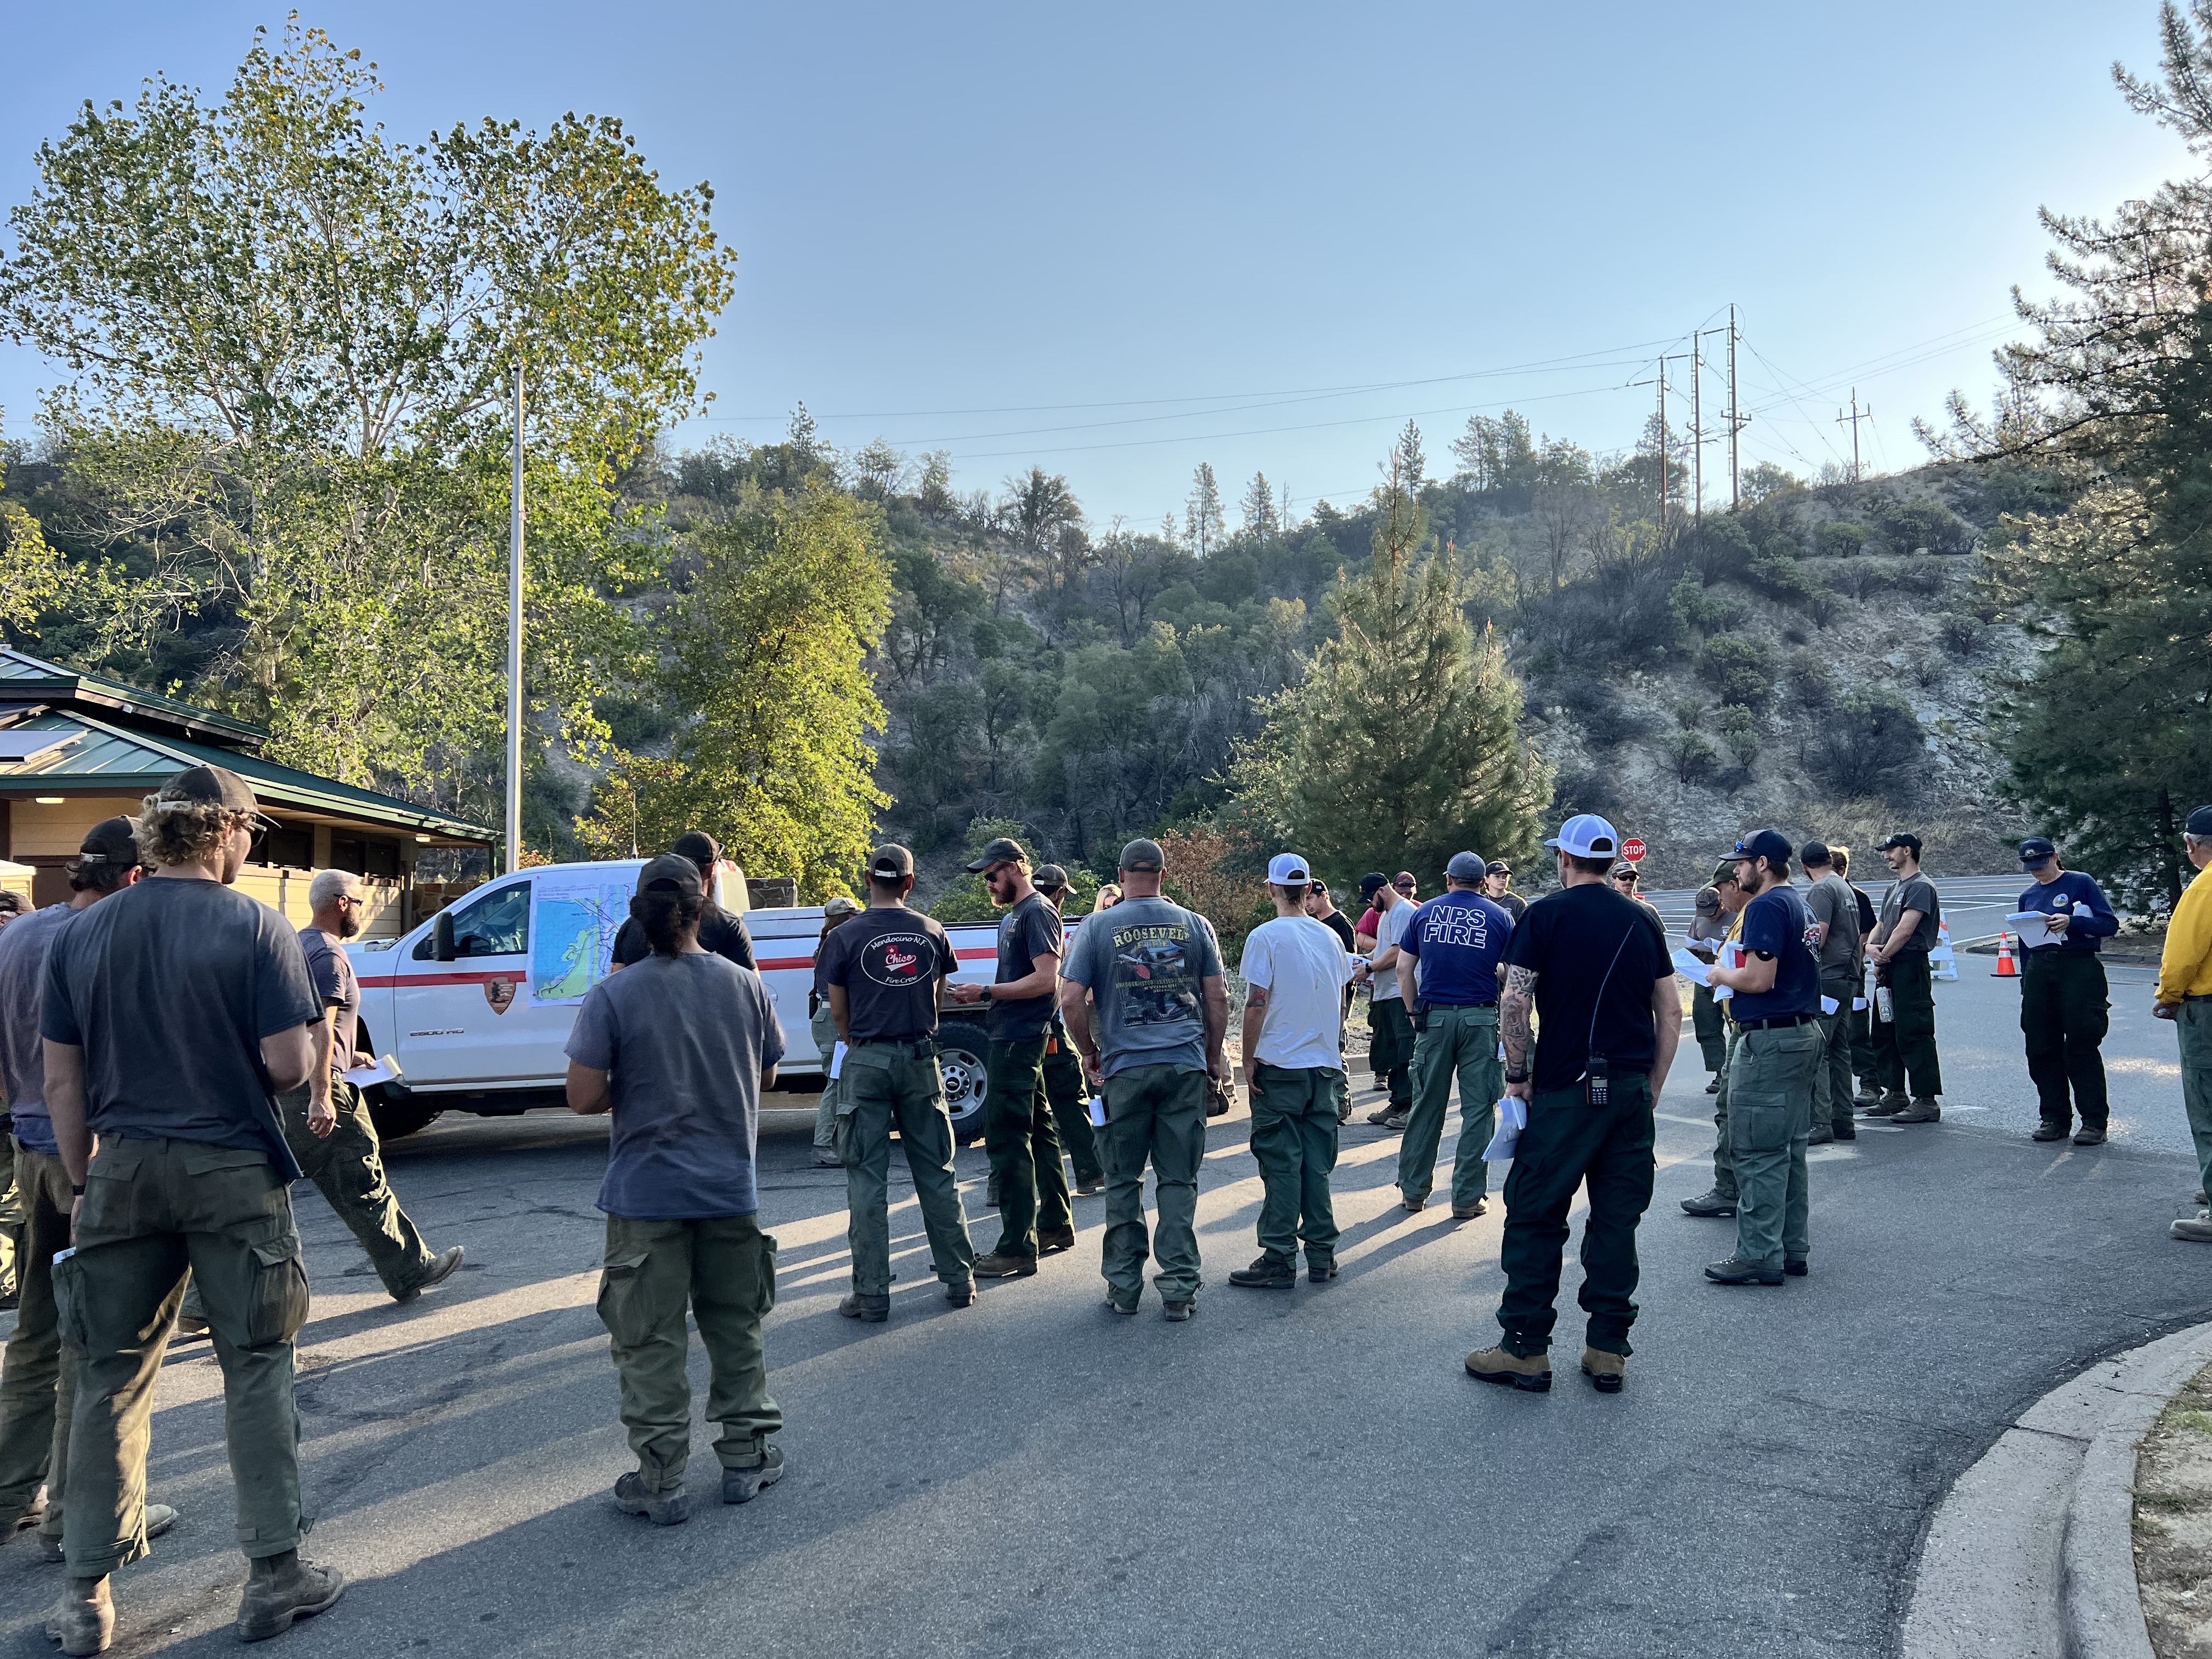 Firefighters from multiple agencies gather for a morning briefing.